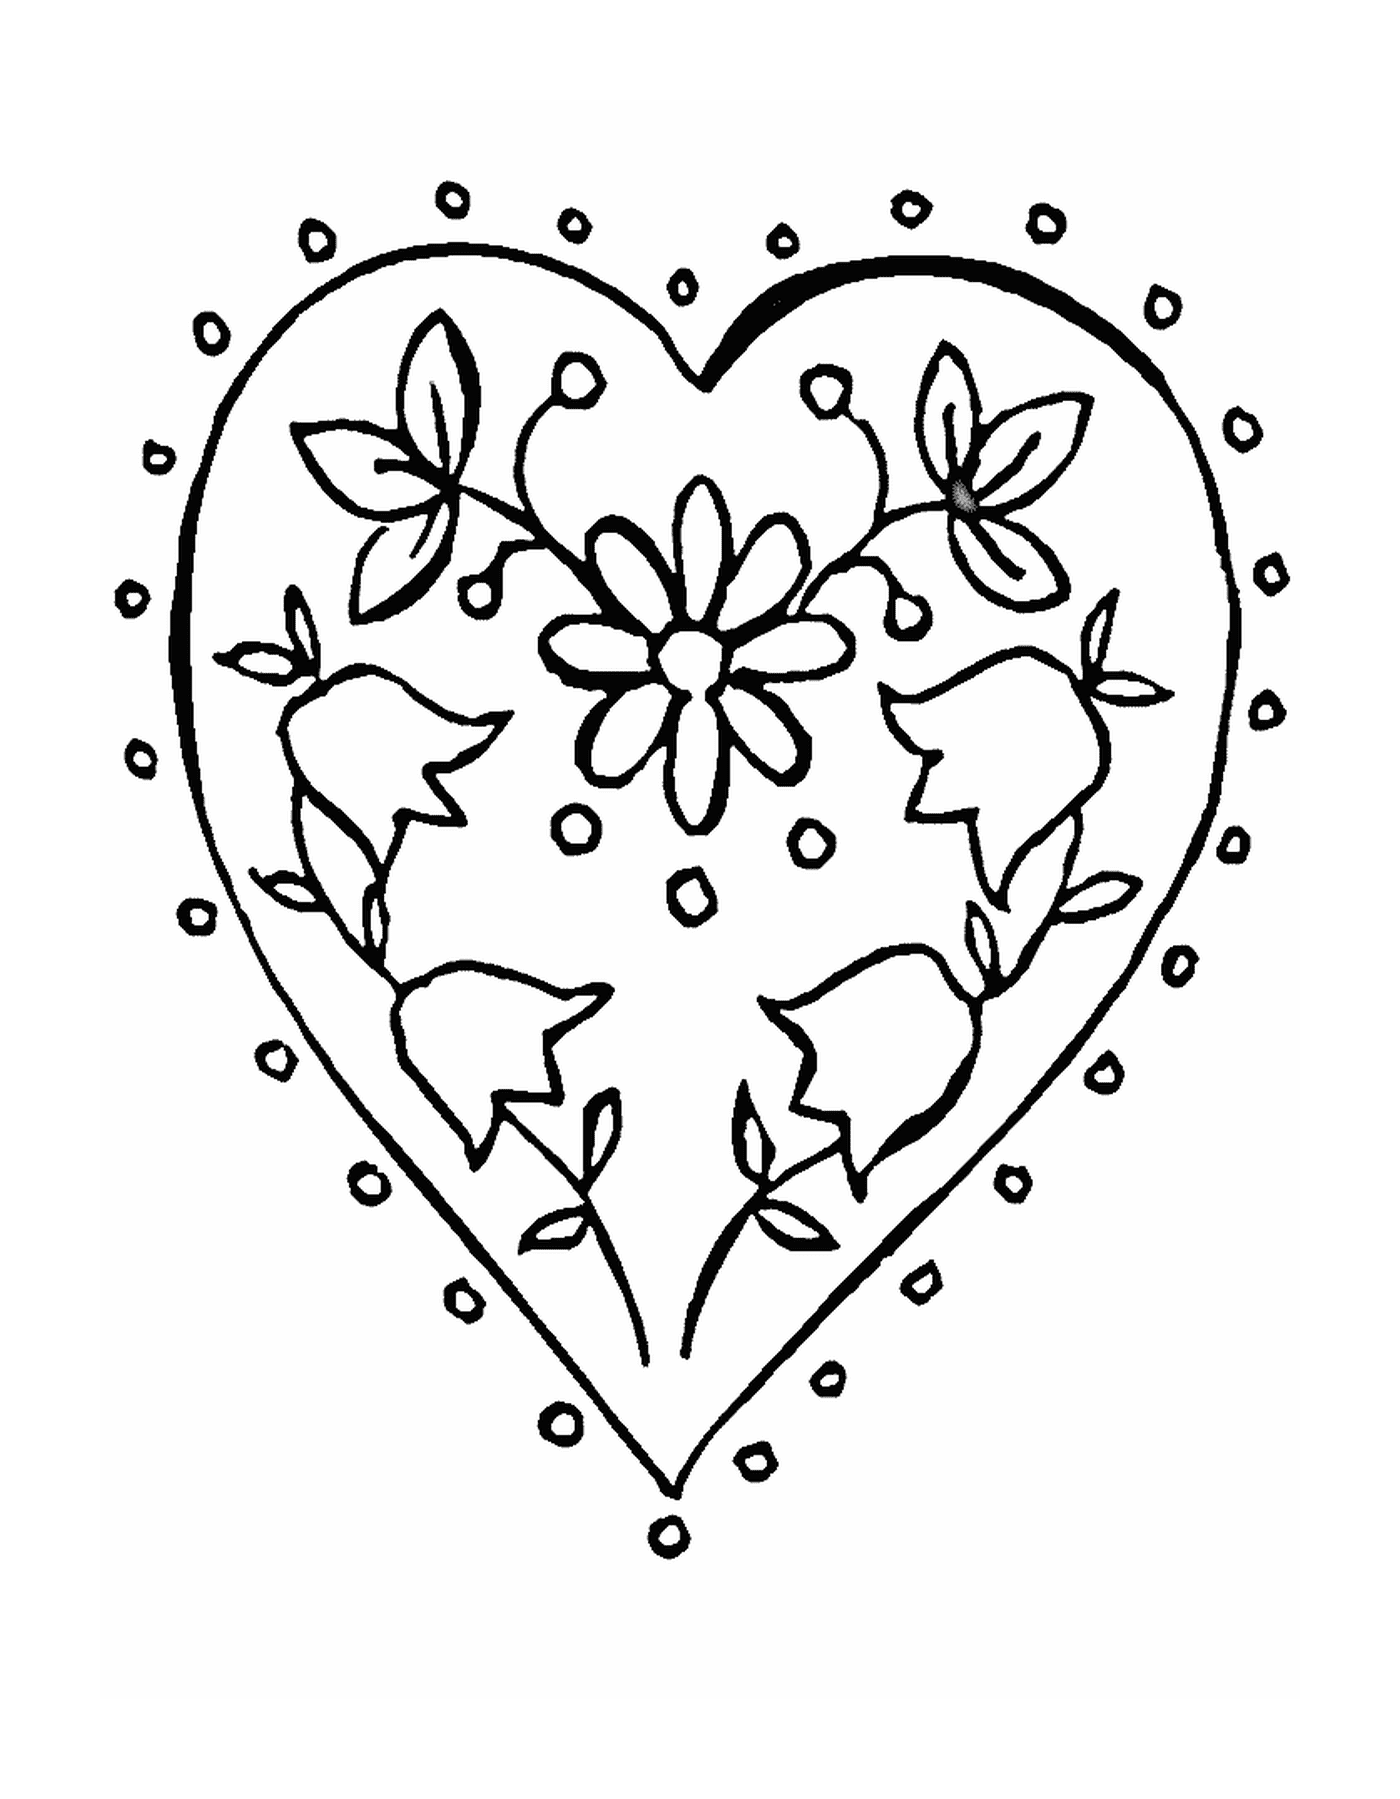  A heart decorated with flowers 